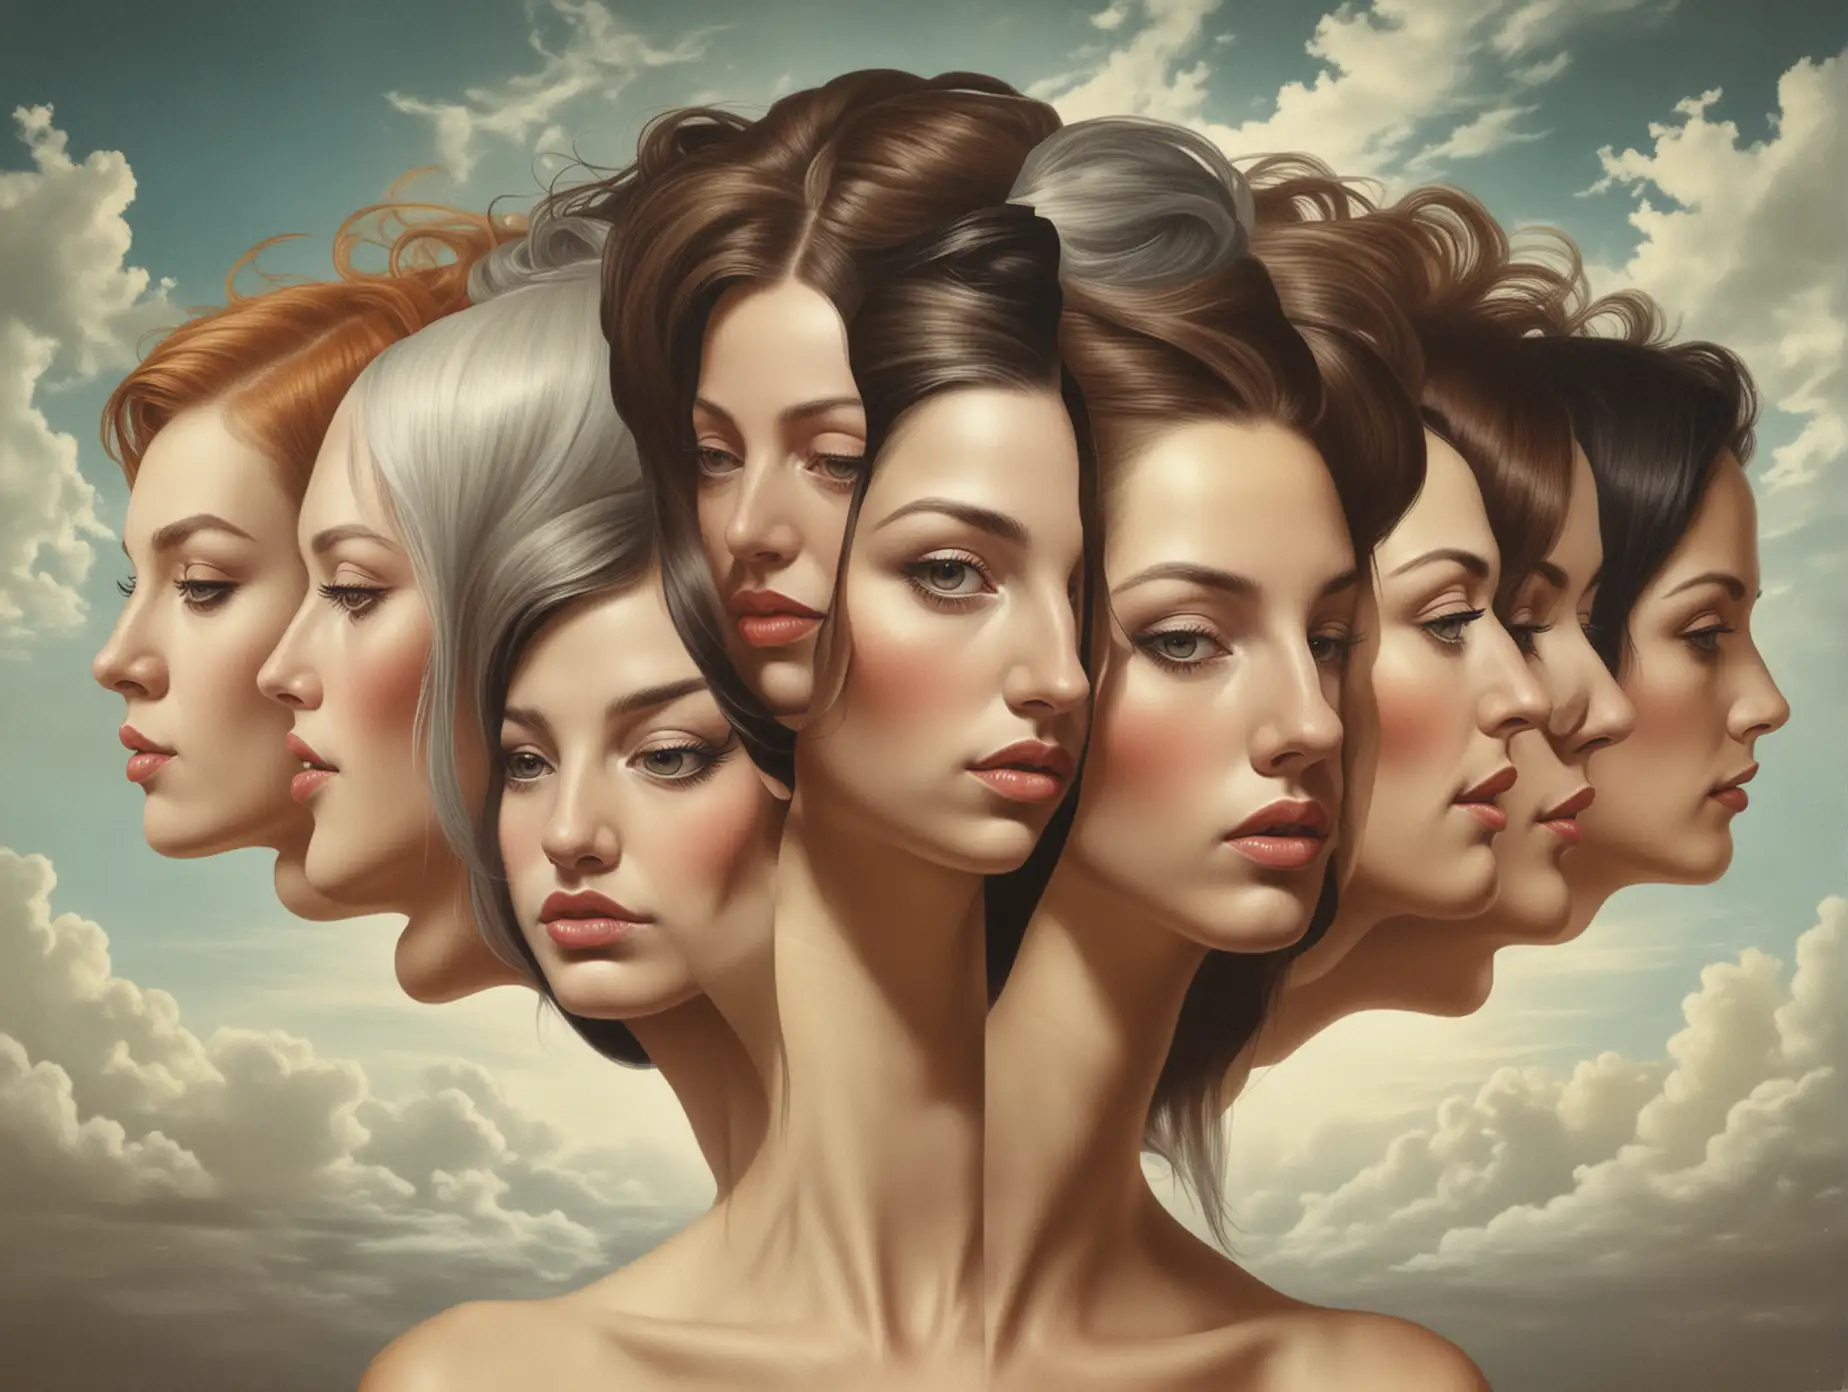 Several women in one woman's head
surrealism